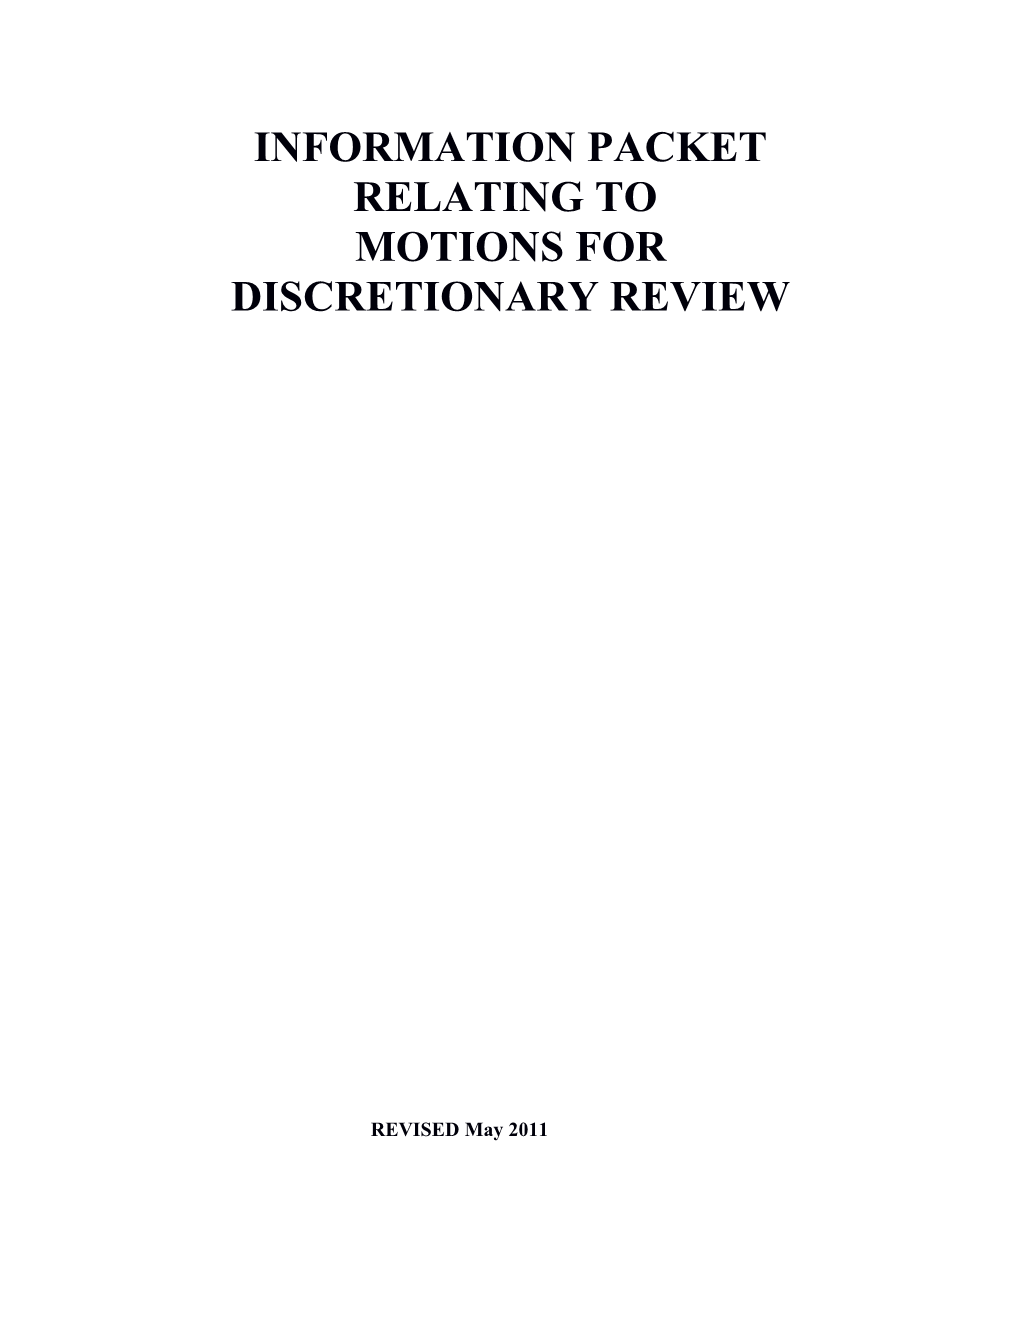 Motions for Discretionary Review